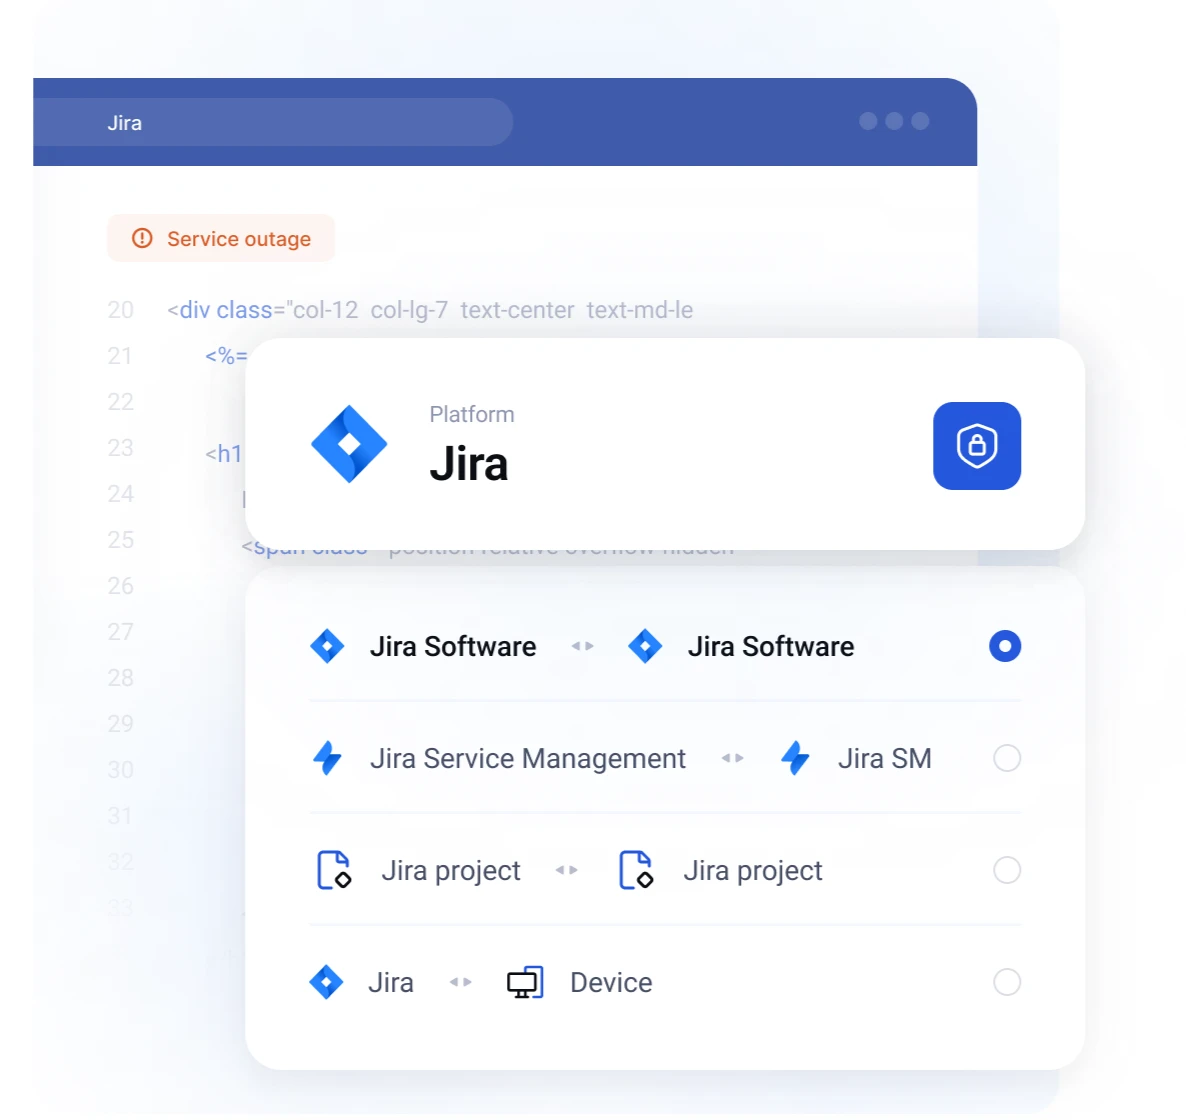 Jira data migration and mobility